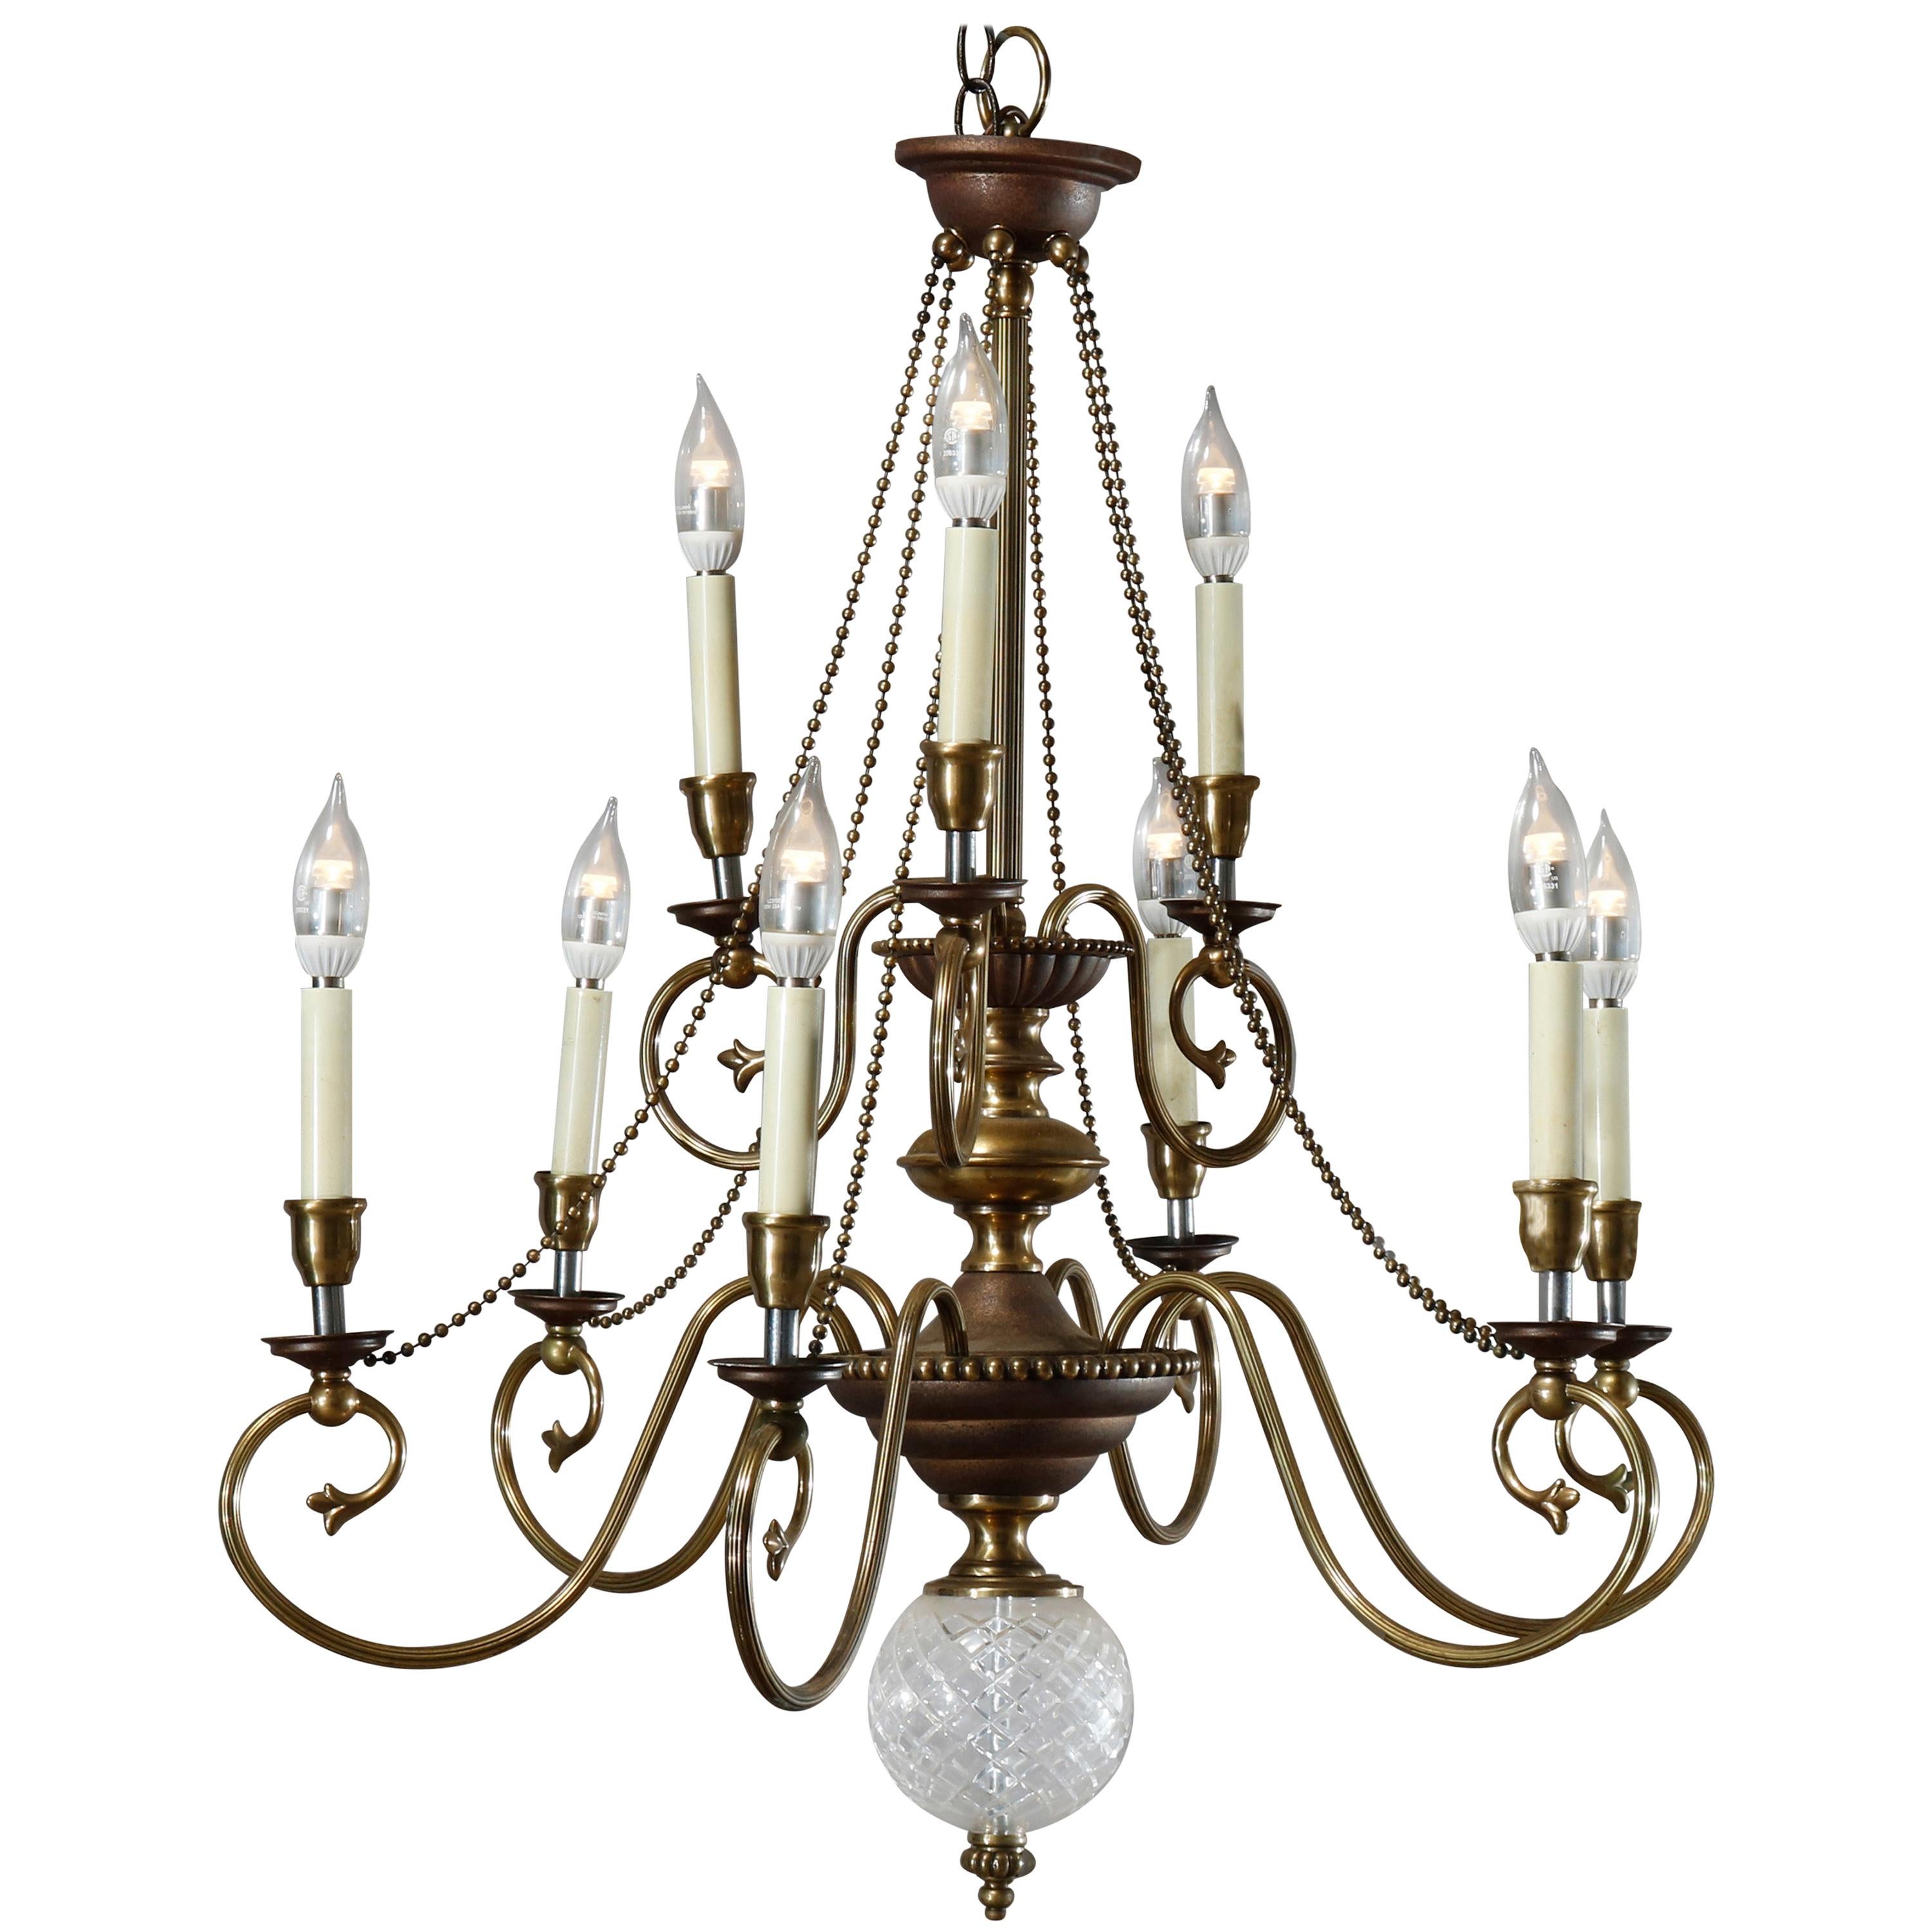 Vintage French Nine-Light Tiered Brass and Crystal Chandelier, 20th Century For Sale